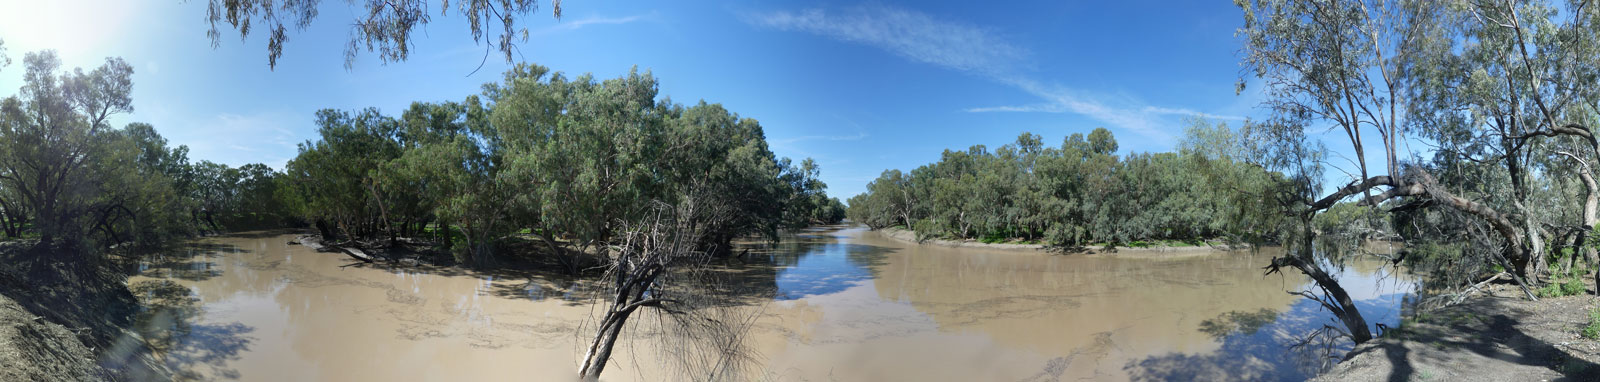 Convergence of the Culgoa and Barwon Rivers to form the Darling River